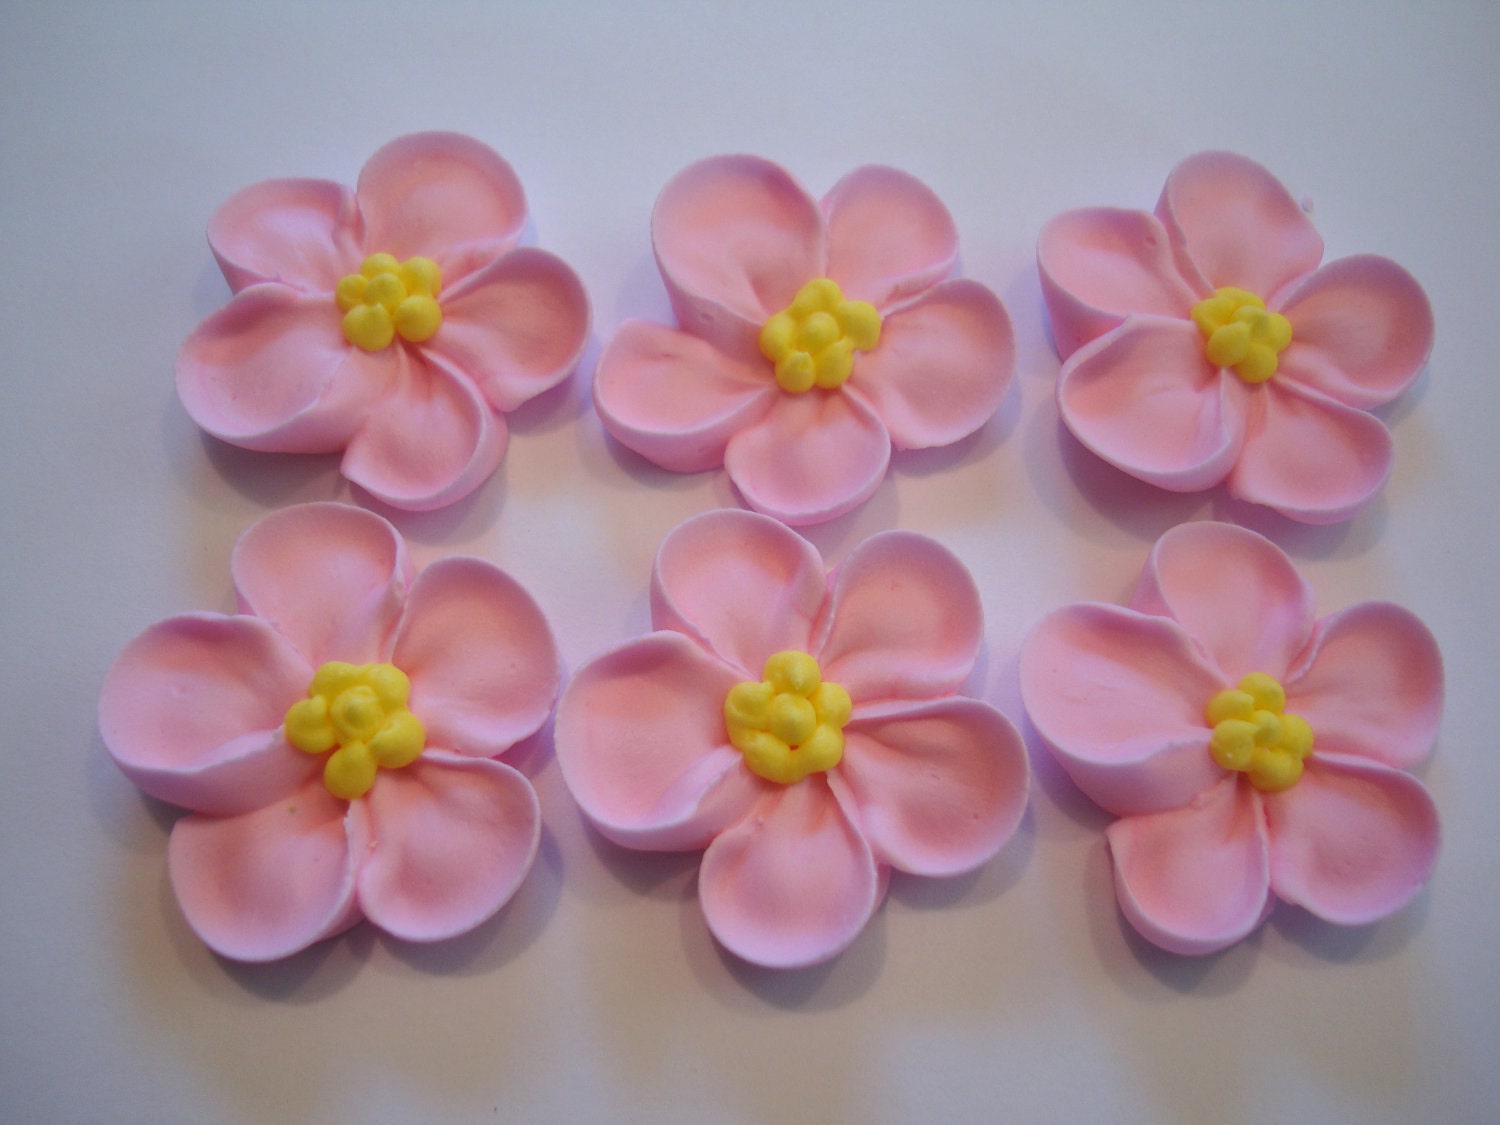 LOT of 100 Royal Icing Flowers for Cake Decorating